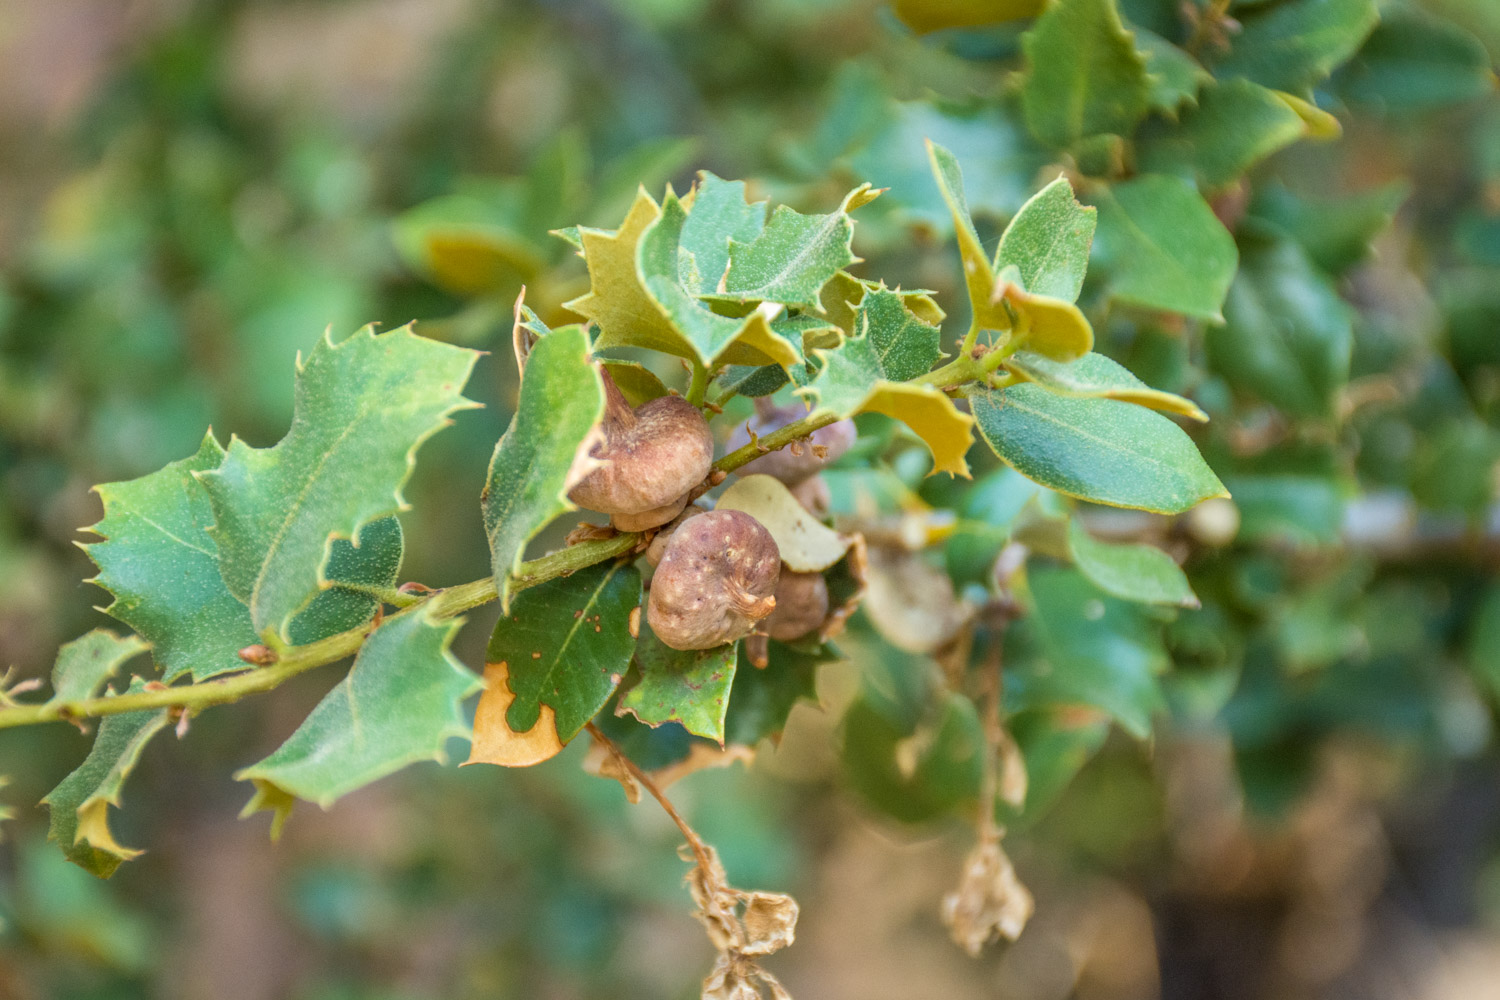 Canyon Live Oak (Quercus chrysolepis) with Mushroom Galls